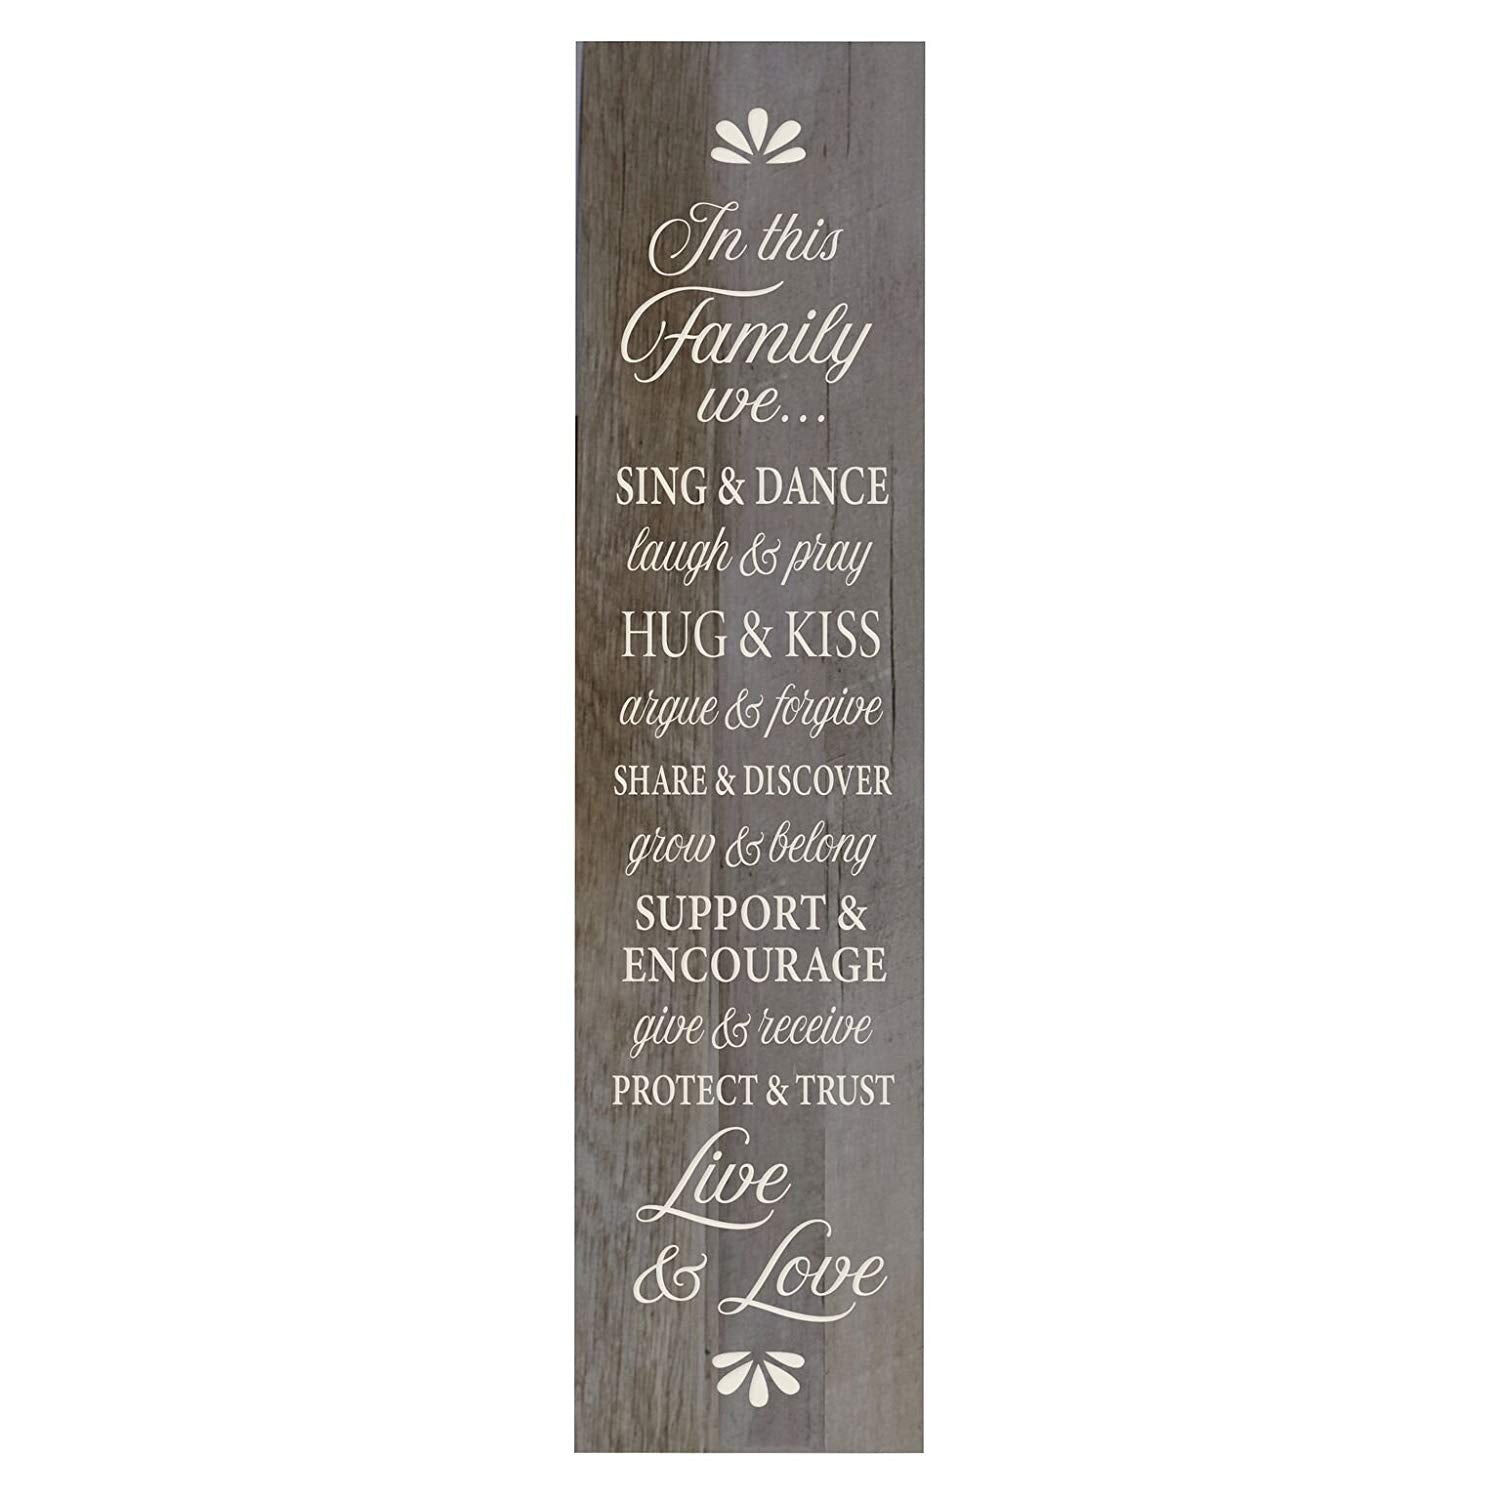 In This Family We Sing and Dance Decorative Wall Art Sign - LifeSong Milestones